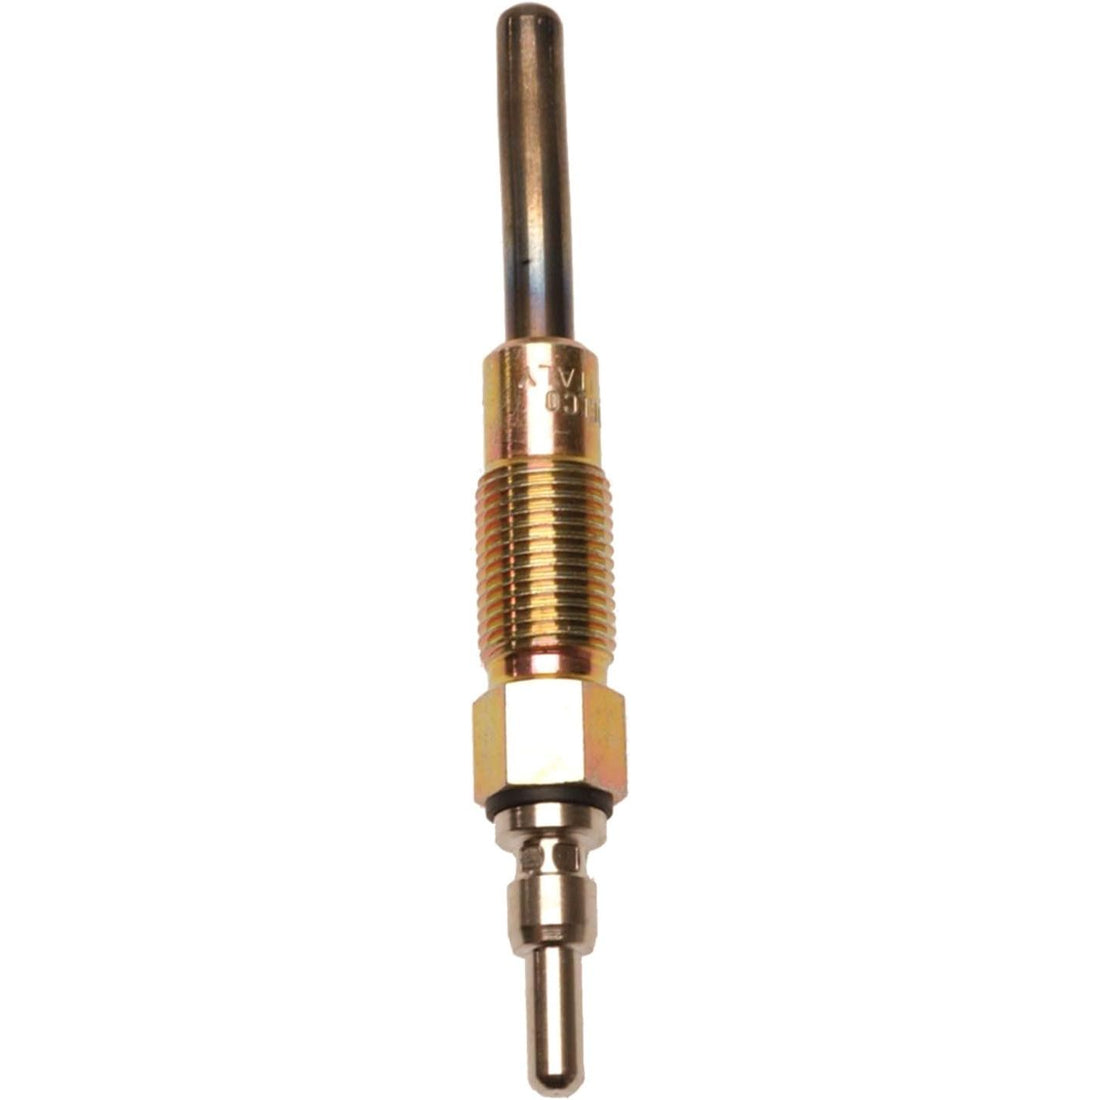 ACDelco Gold 32G Glow Plug (Pack of 1)